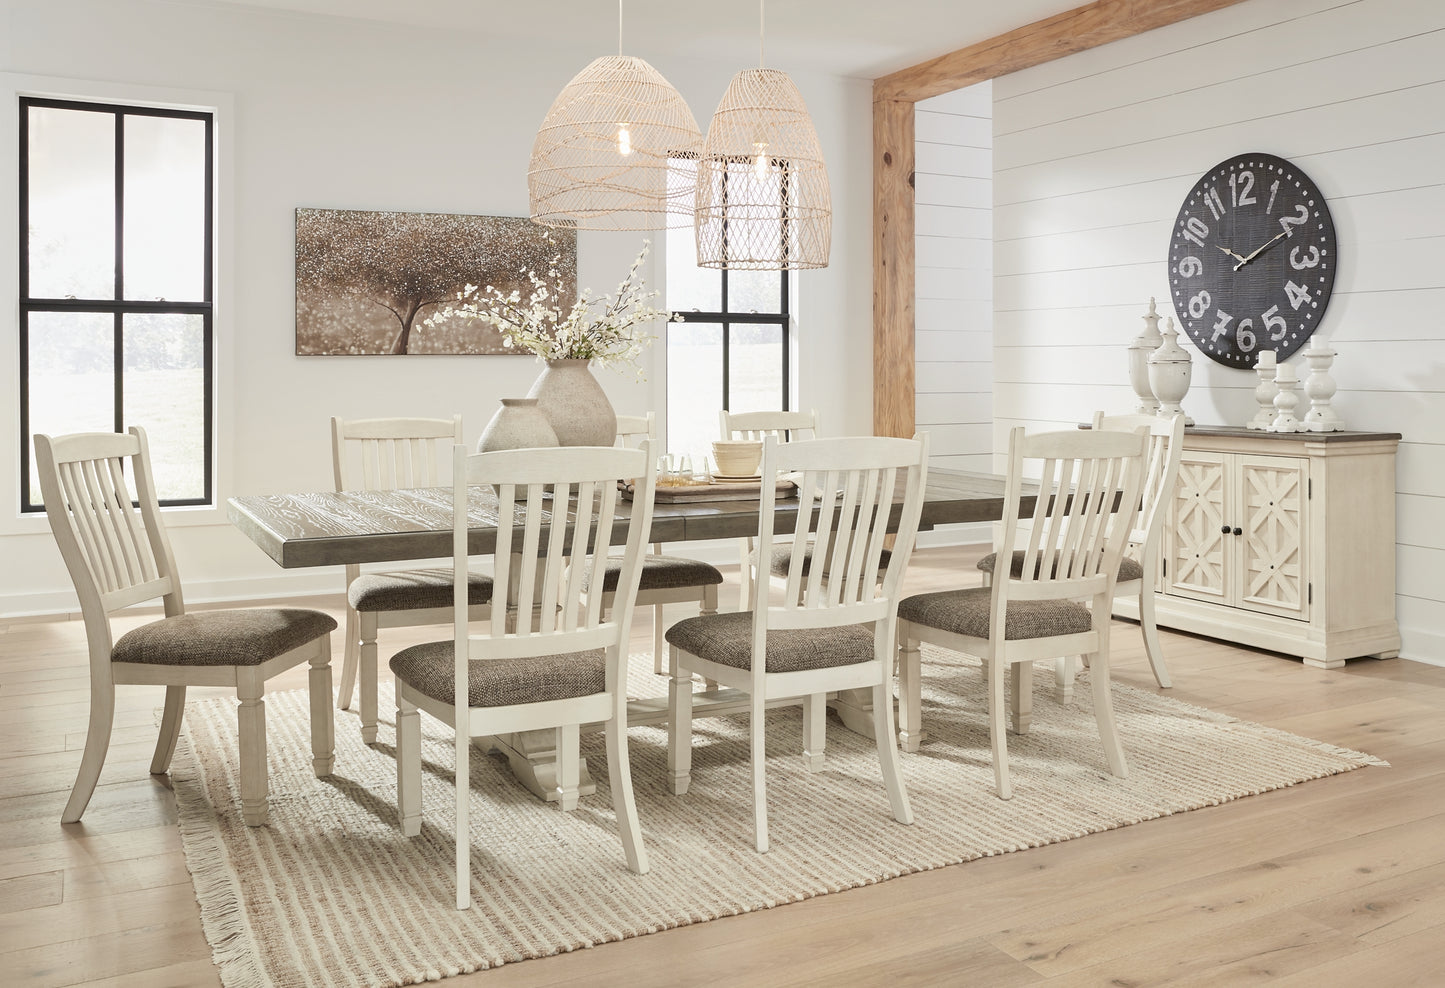 Bolanburg Dining Table and 8 Chairs